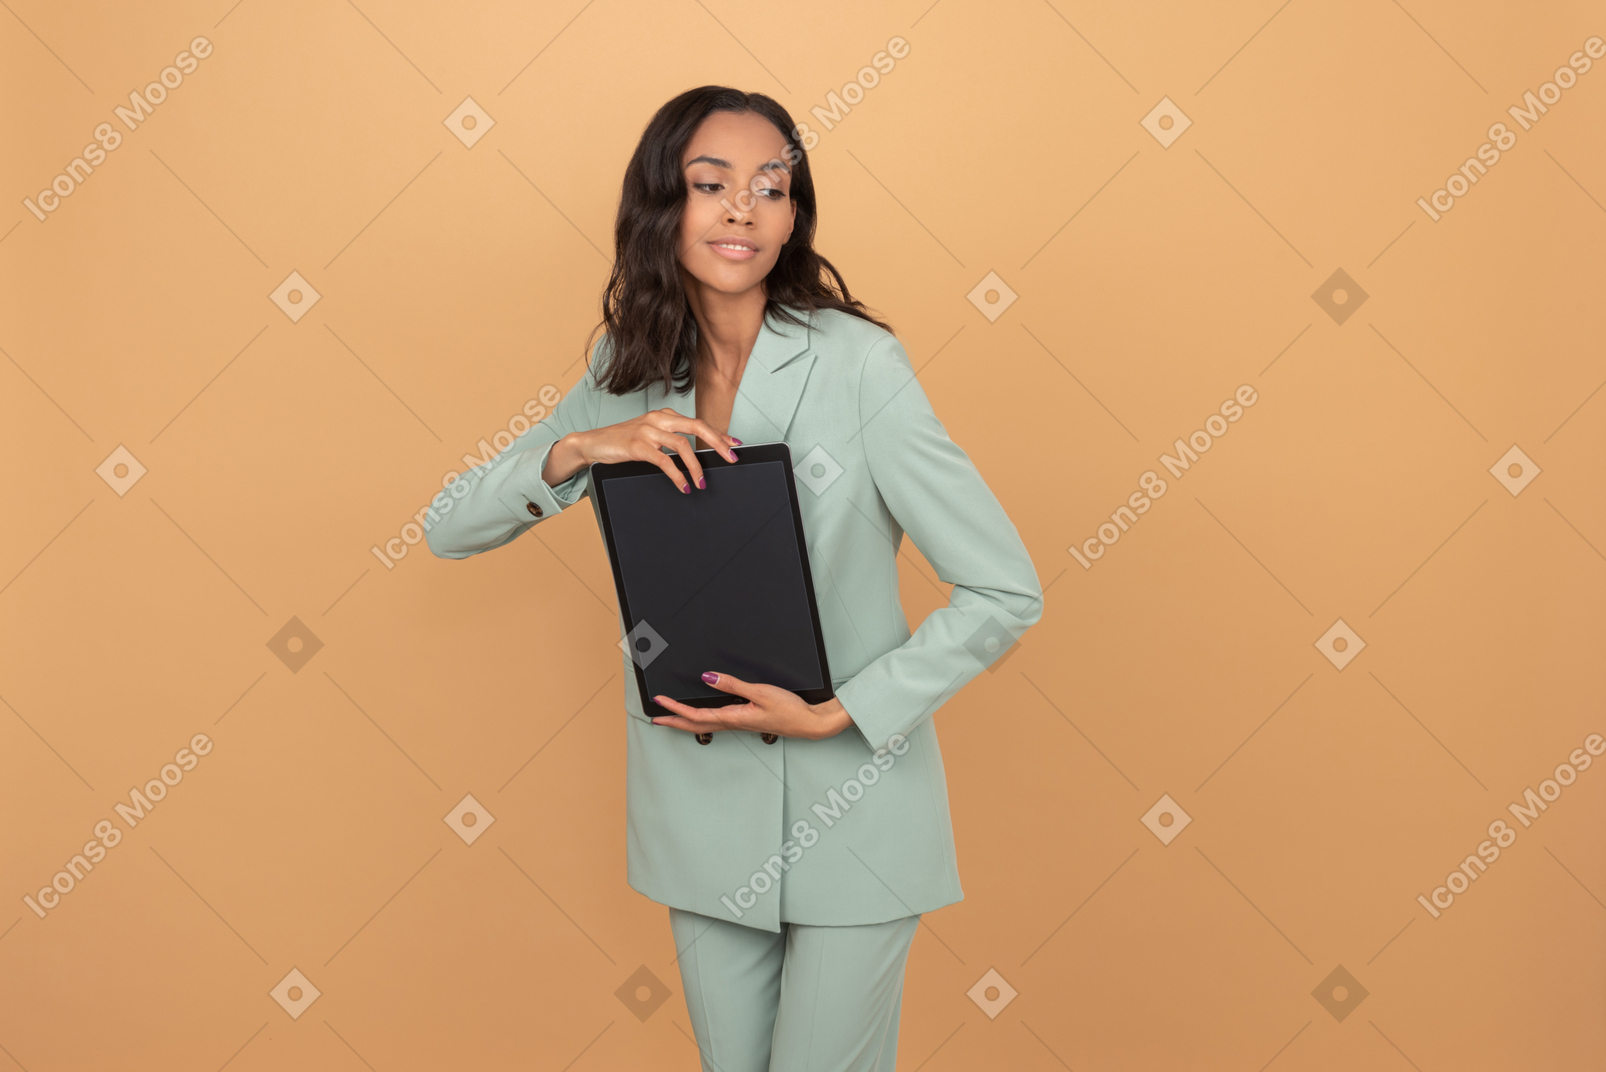 Attractive young woman holding a digital tablet